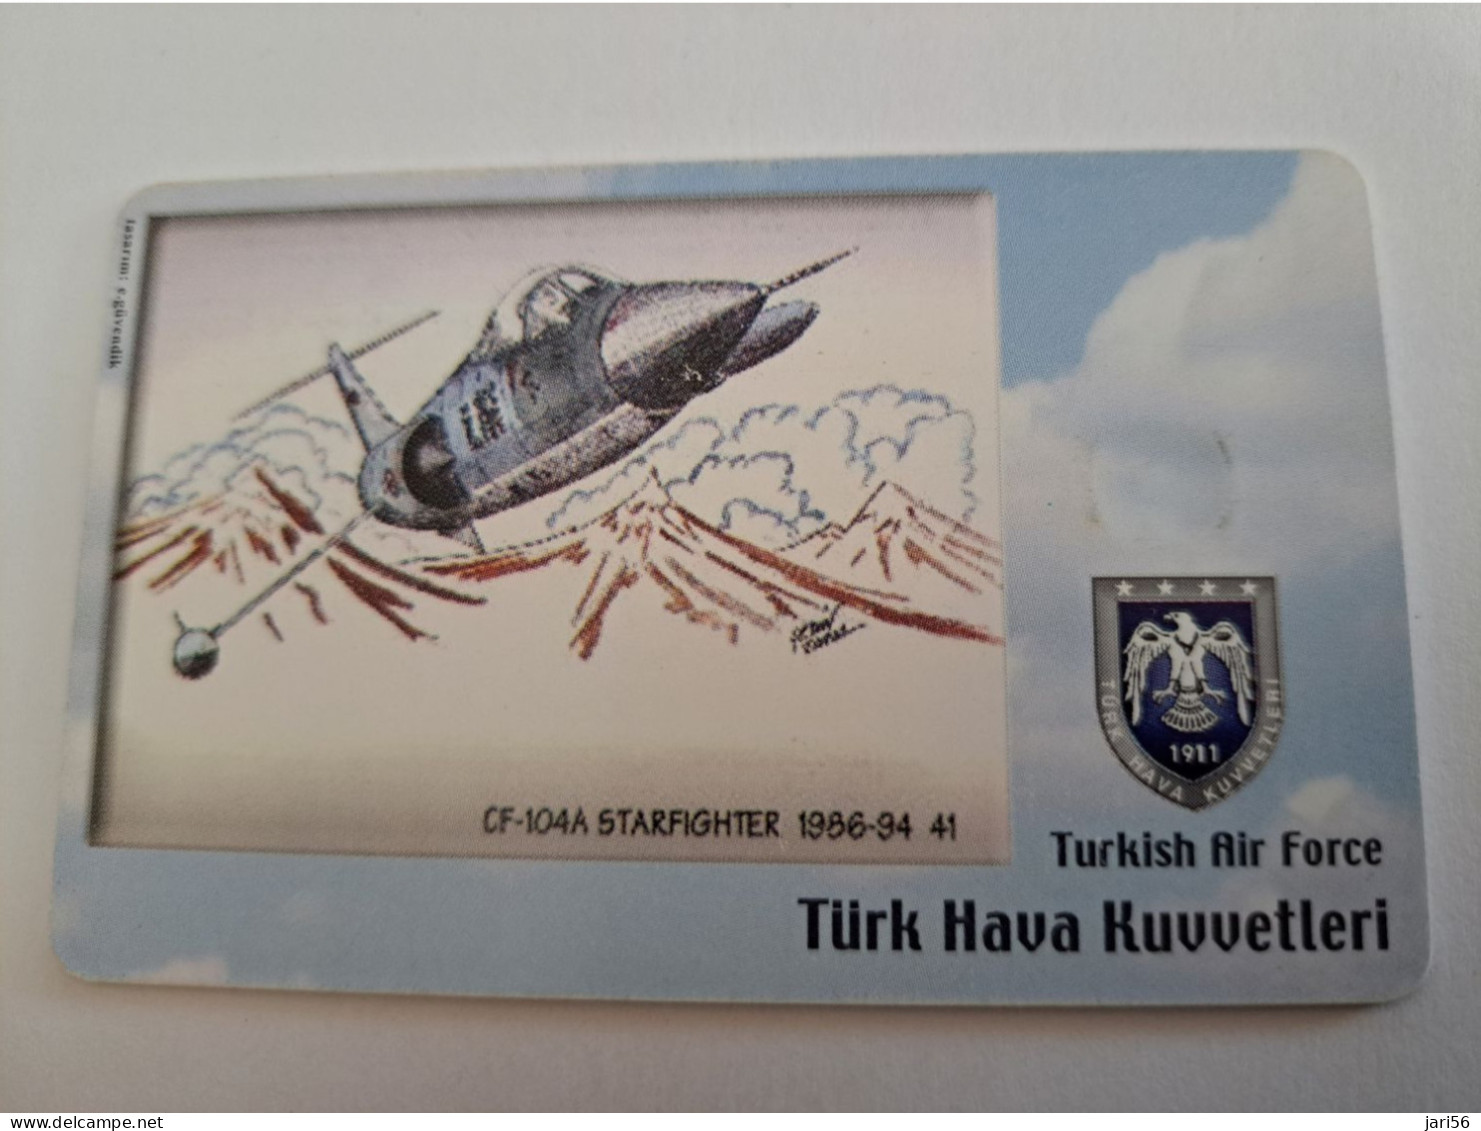 TURKIJE / 50 UNITS/ CHIPCARD/ TURKISH AIR FORCE  / DIFFERENT PLANES /        Fine Used Card  **15417** - Turquie